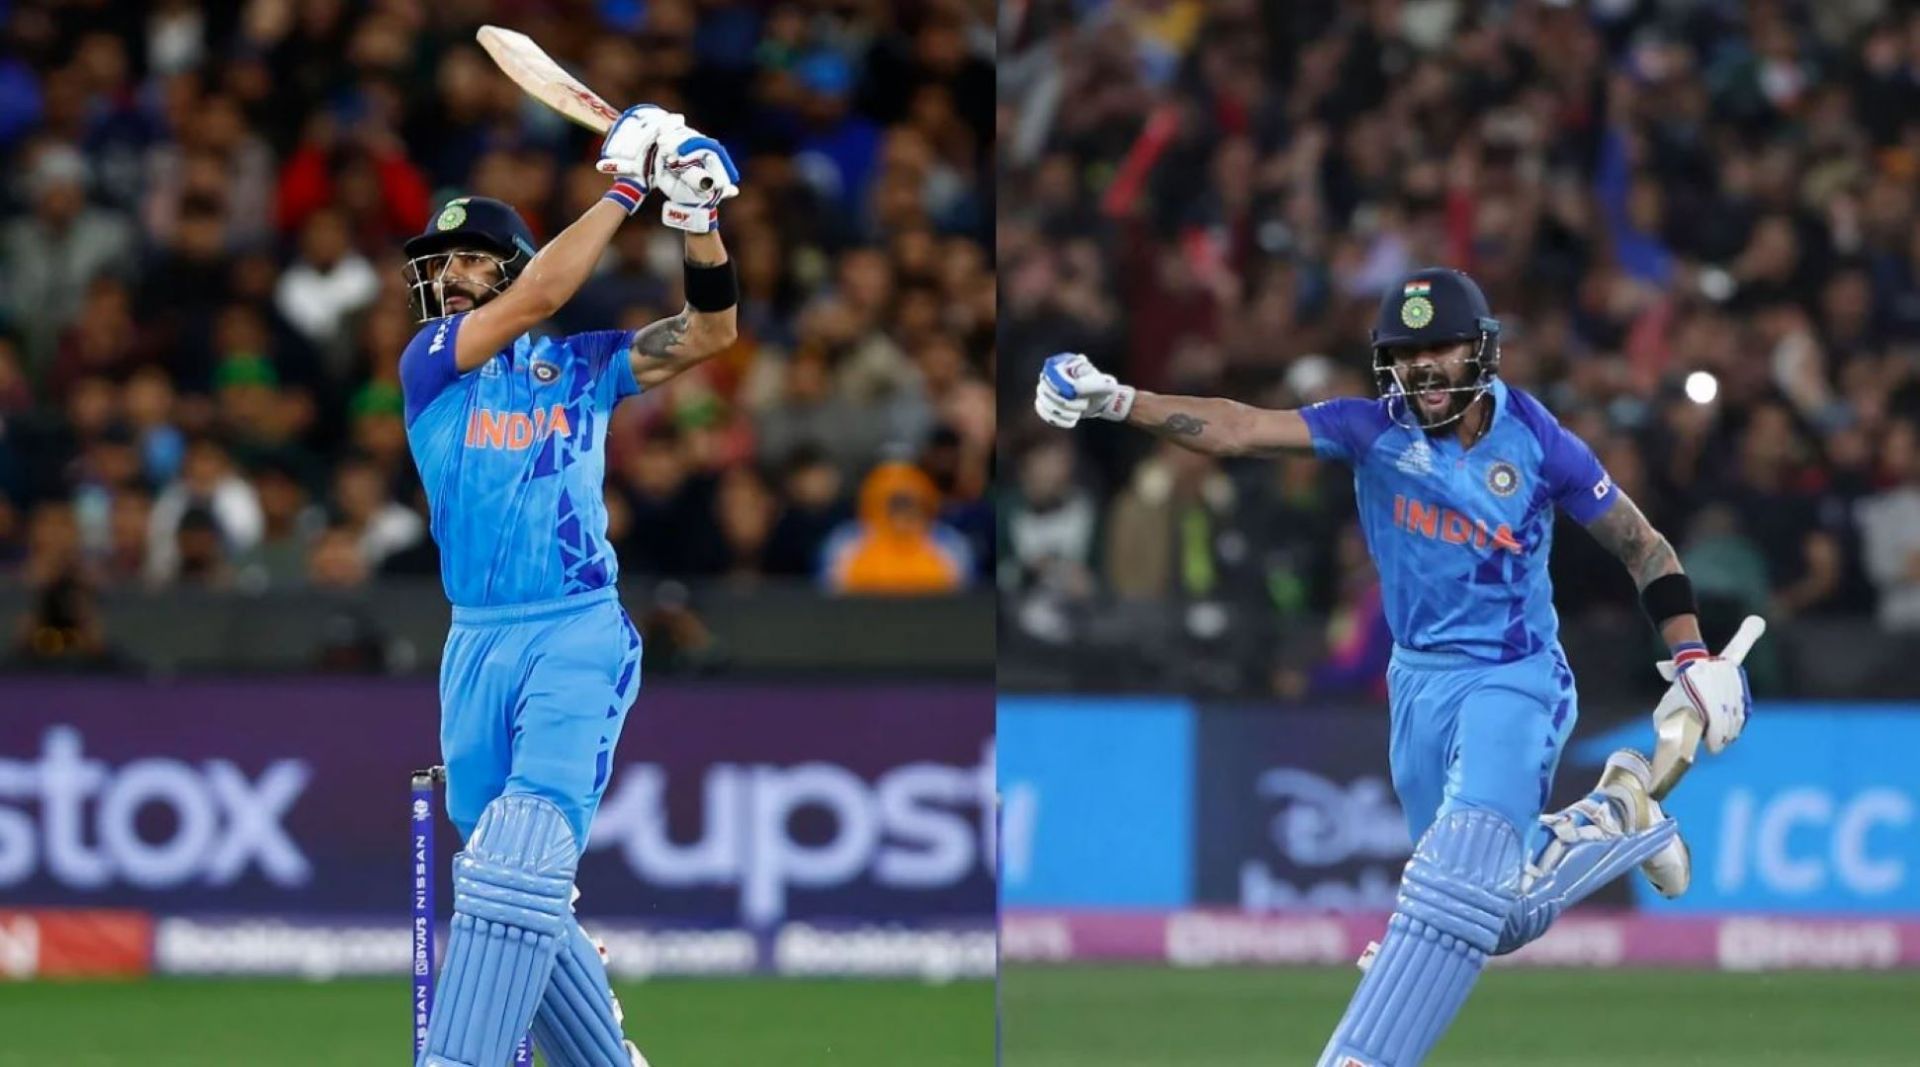 Kohli helped India pull off a miraculous win over their arch-rivals